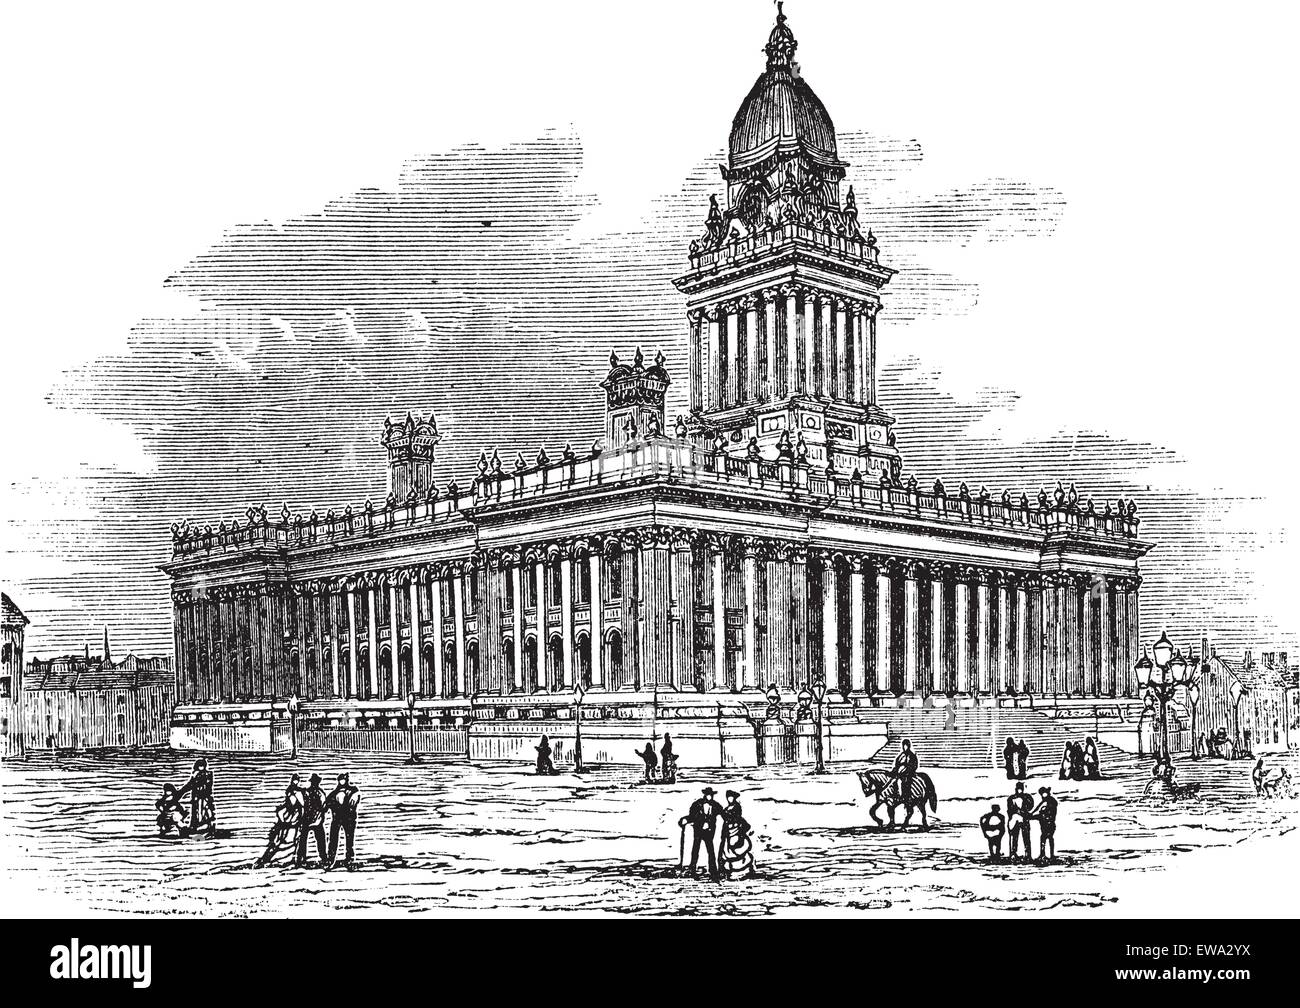 Townhouse, Leeds, England vintage engraving. Old engraved illustration of exterior of townhouse, Leeds, England, 1800s. Stock Vector